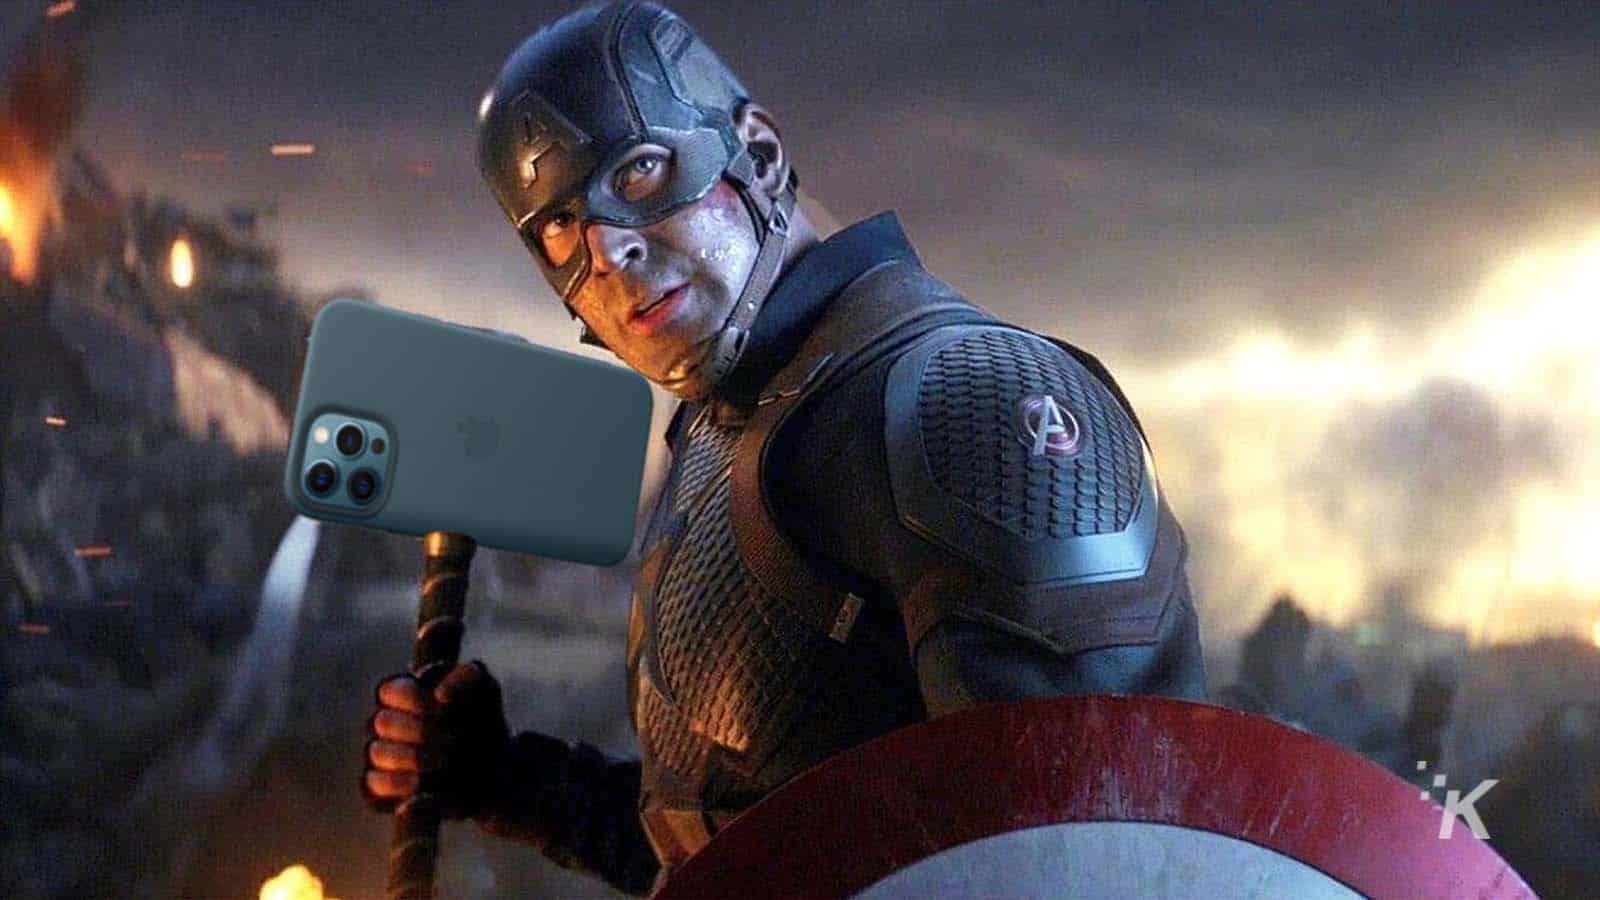 captain america holding thor's hammer but it's an iphone 12